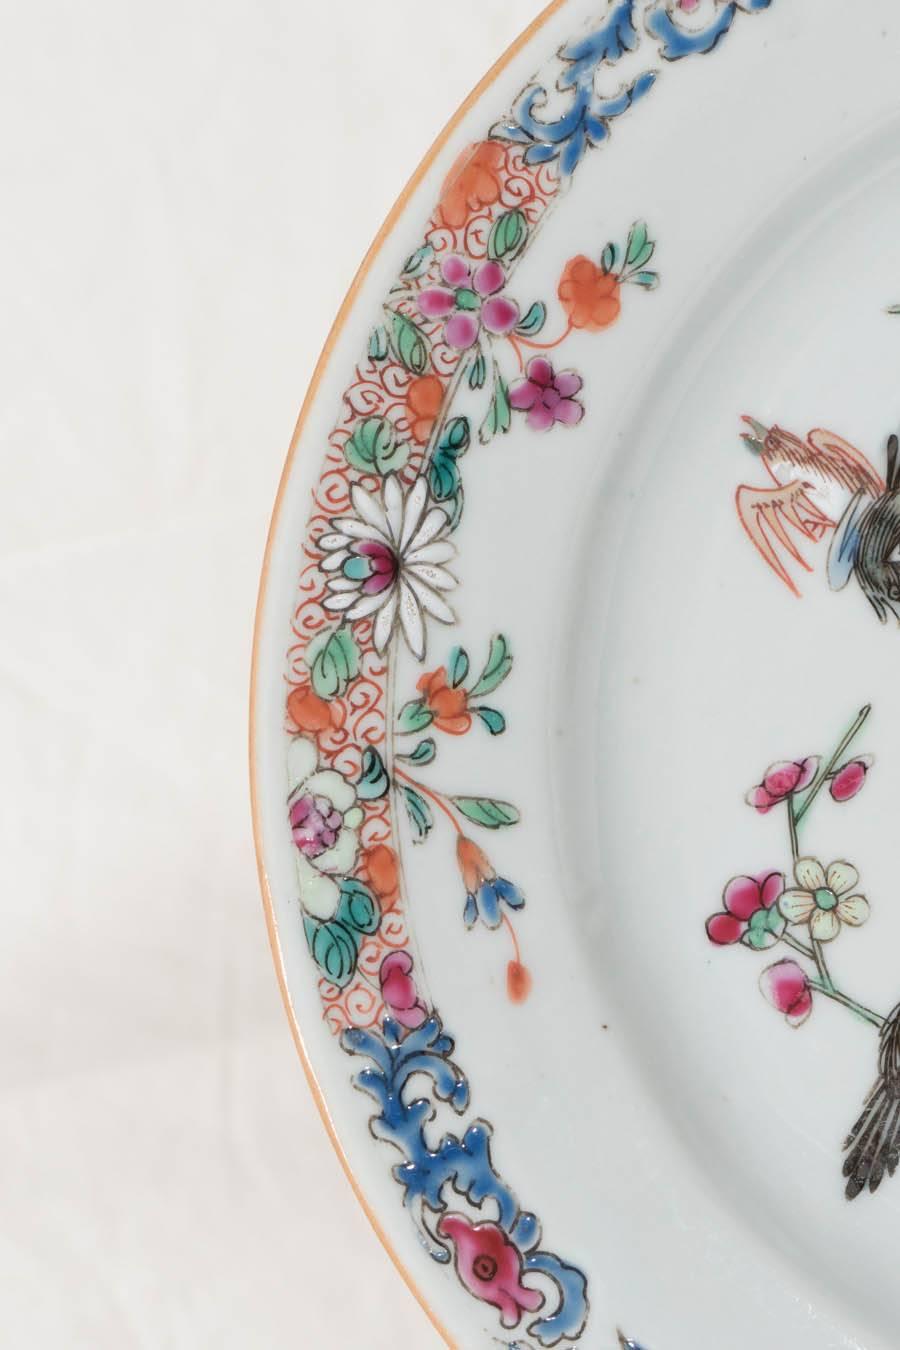 18th Century Antique Chinese Porcelain Dishes Symbolizing Youth Beauty and Good Fortune